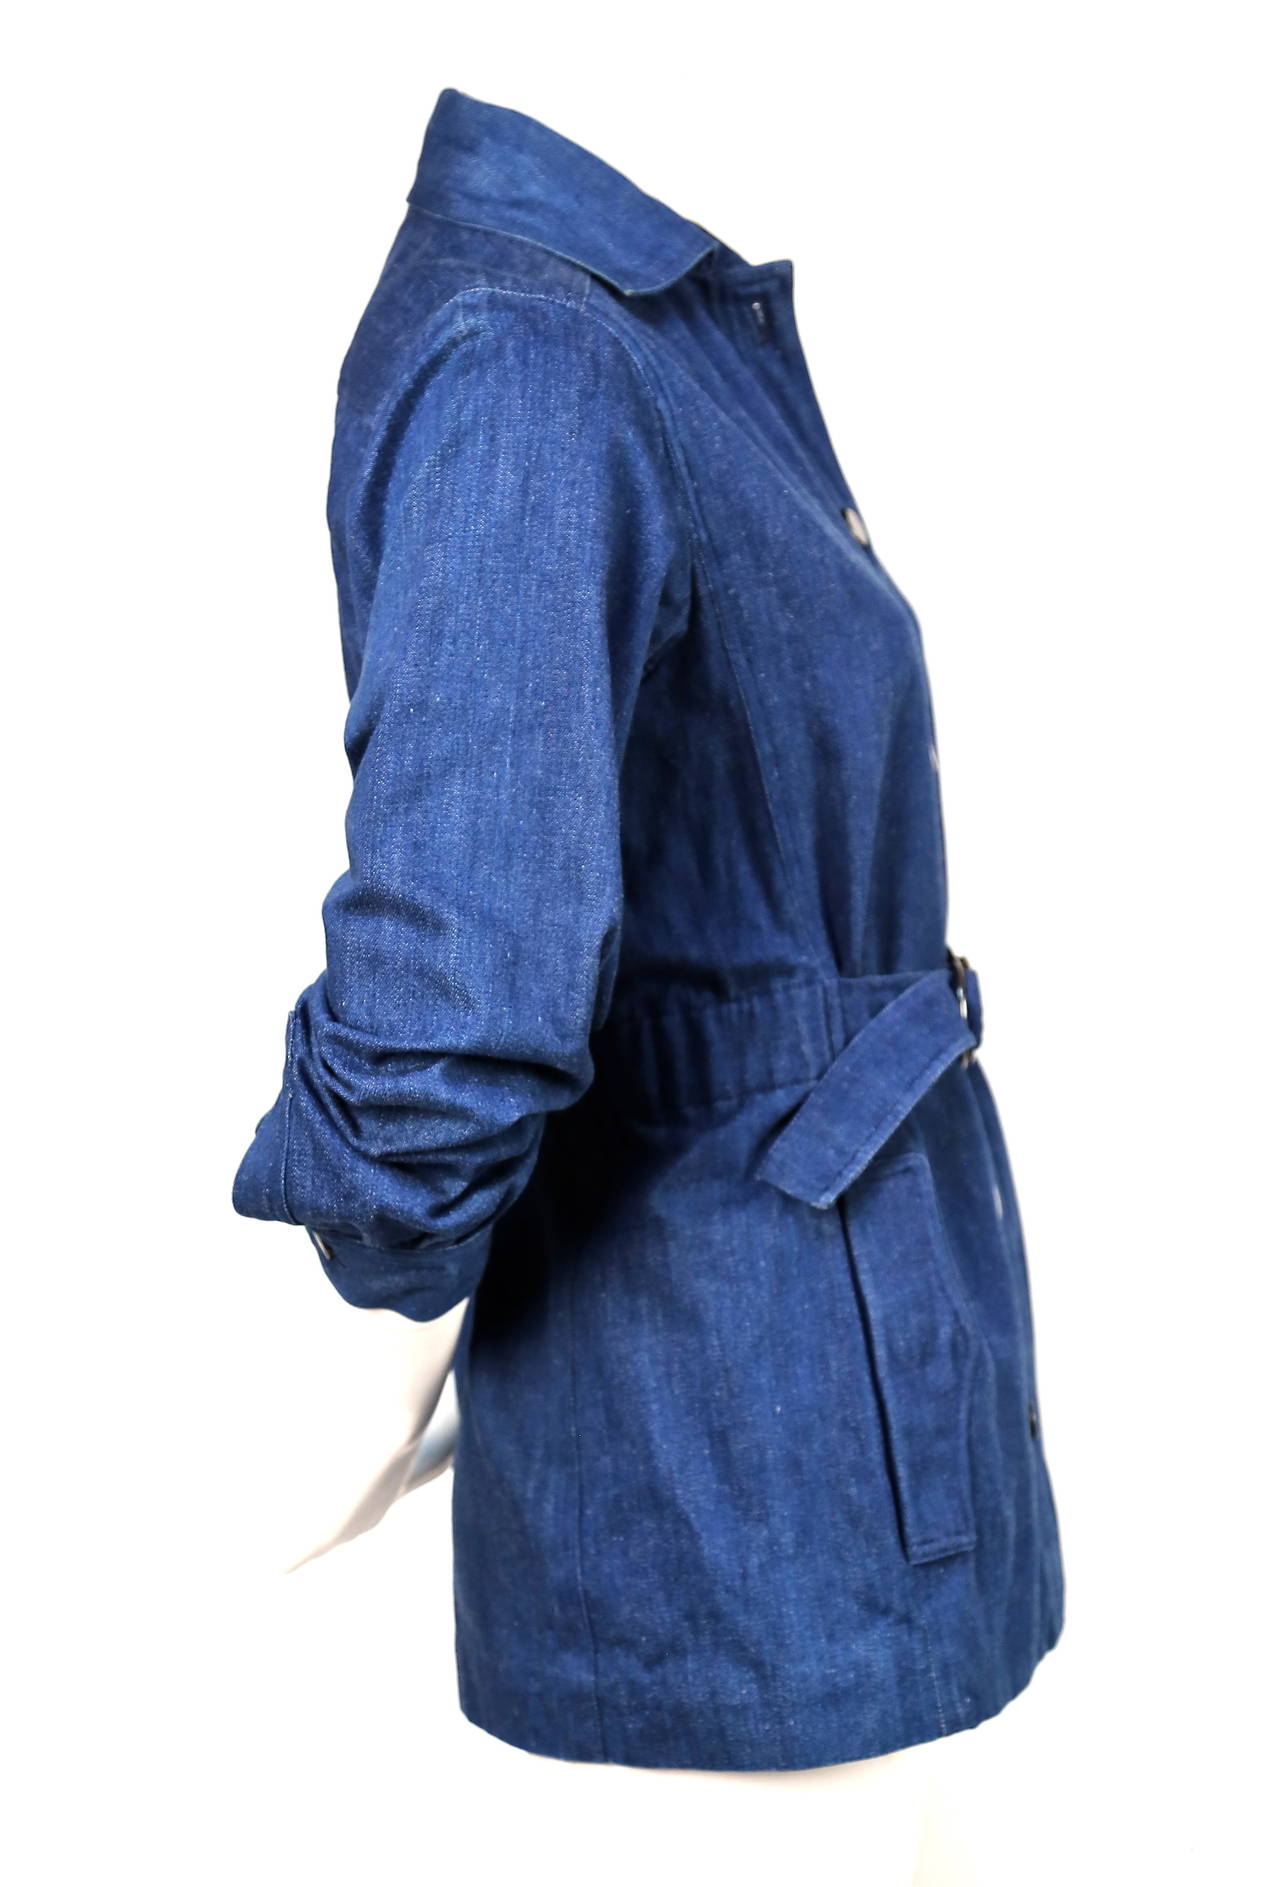 Medium blue denim safari style jacket designed by Yves Saint Laurent dating to the early 1970's. Jacket best fits a US 4 or 6. Approximate measurements: 14.25